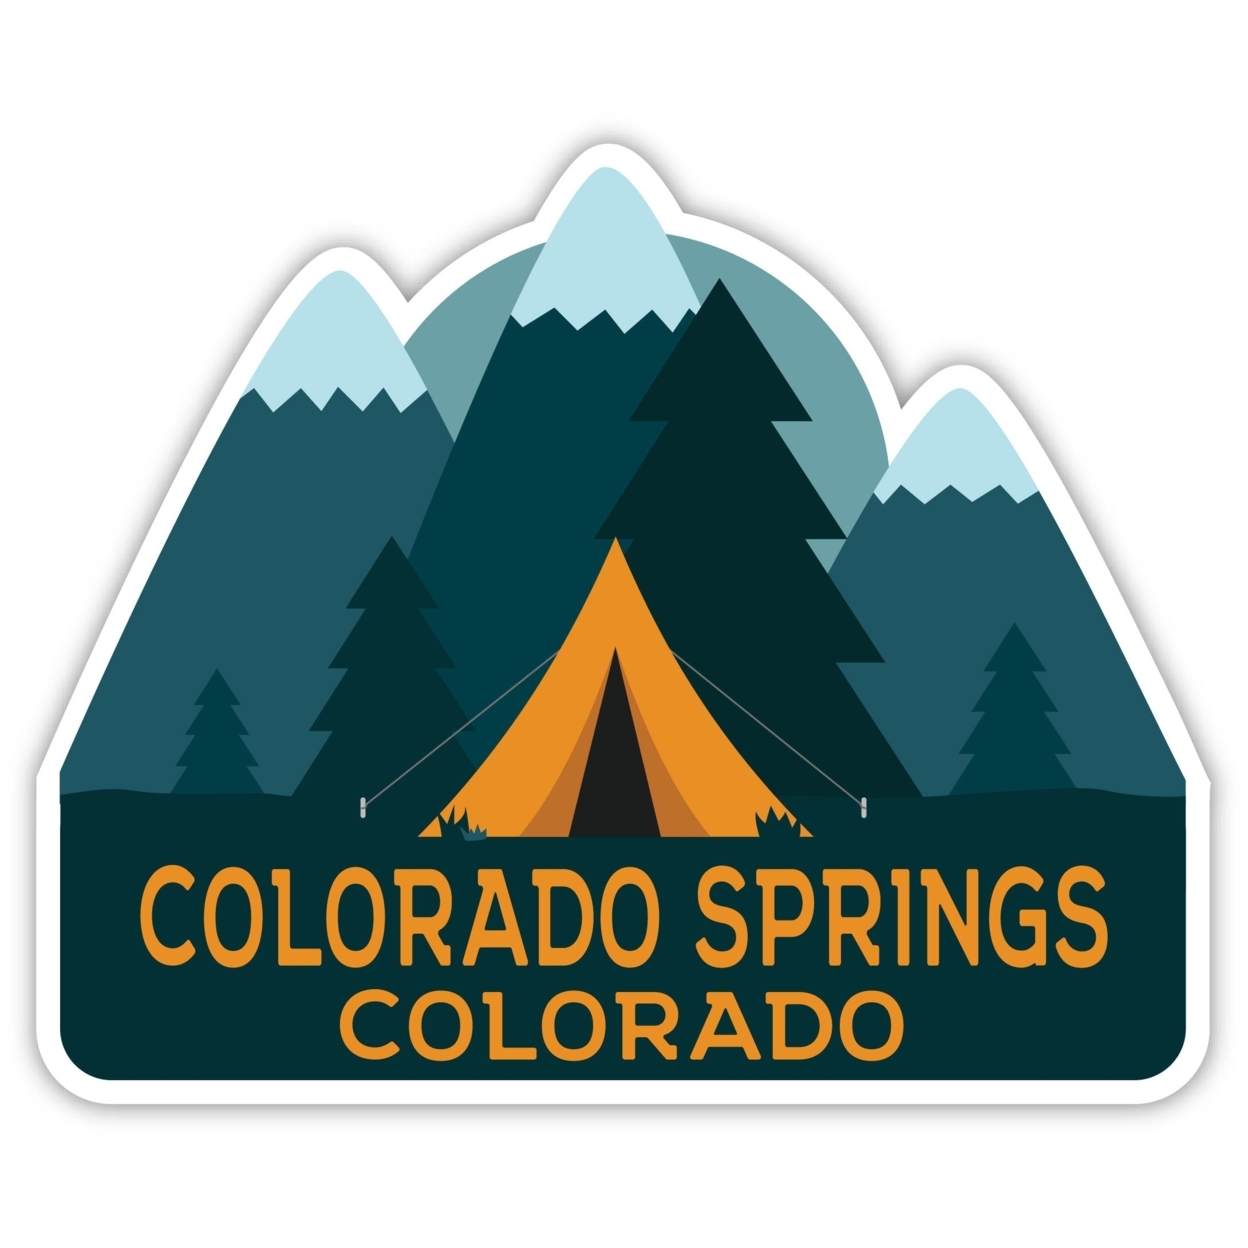 Colorado Springs Colorado Souvenir Decorative Stickers (Choose Theme And Size) - 4-Pack, 6-Inch, Great Outdoors